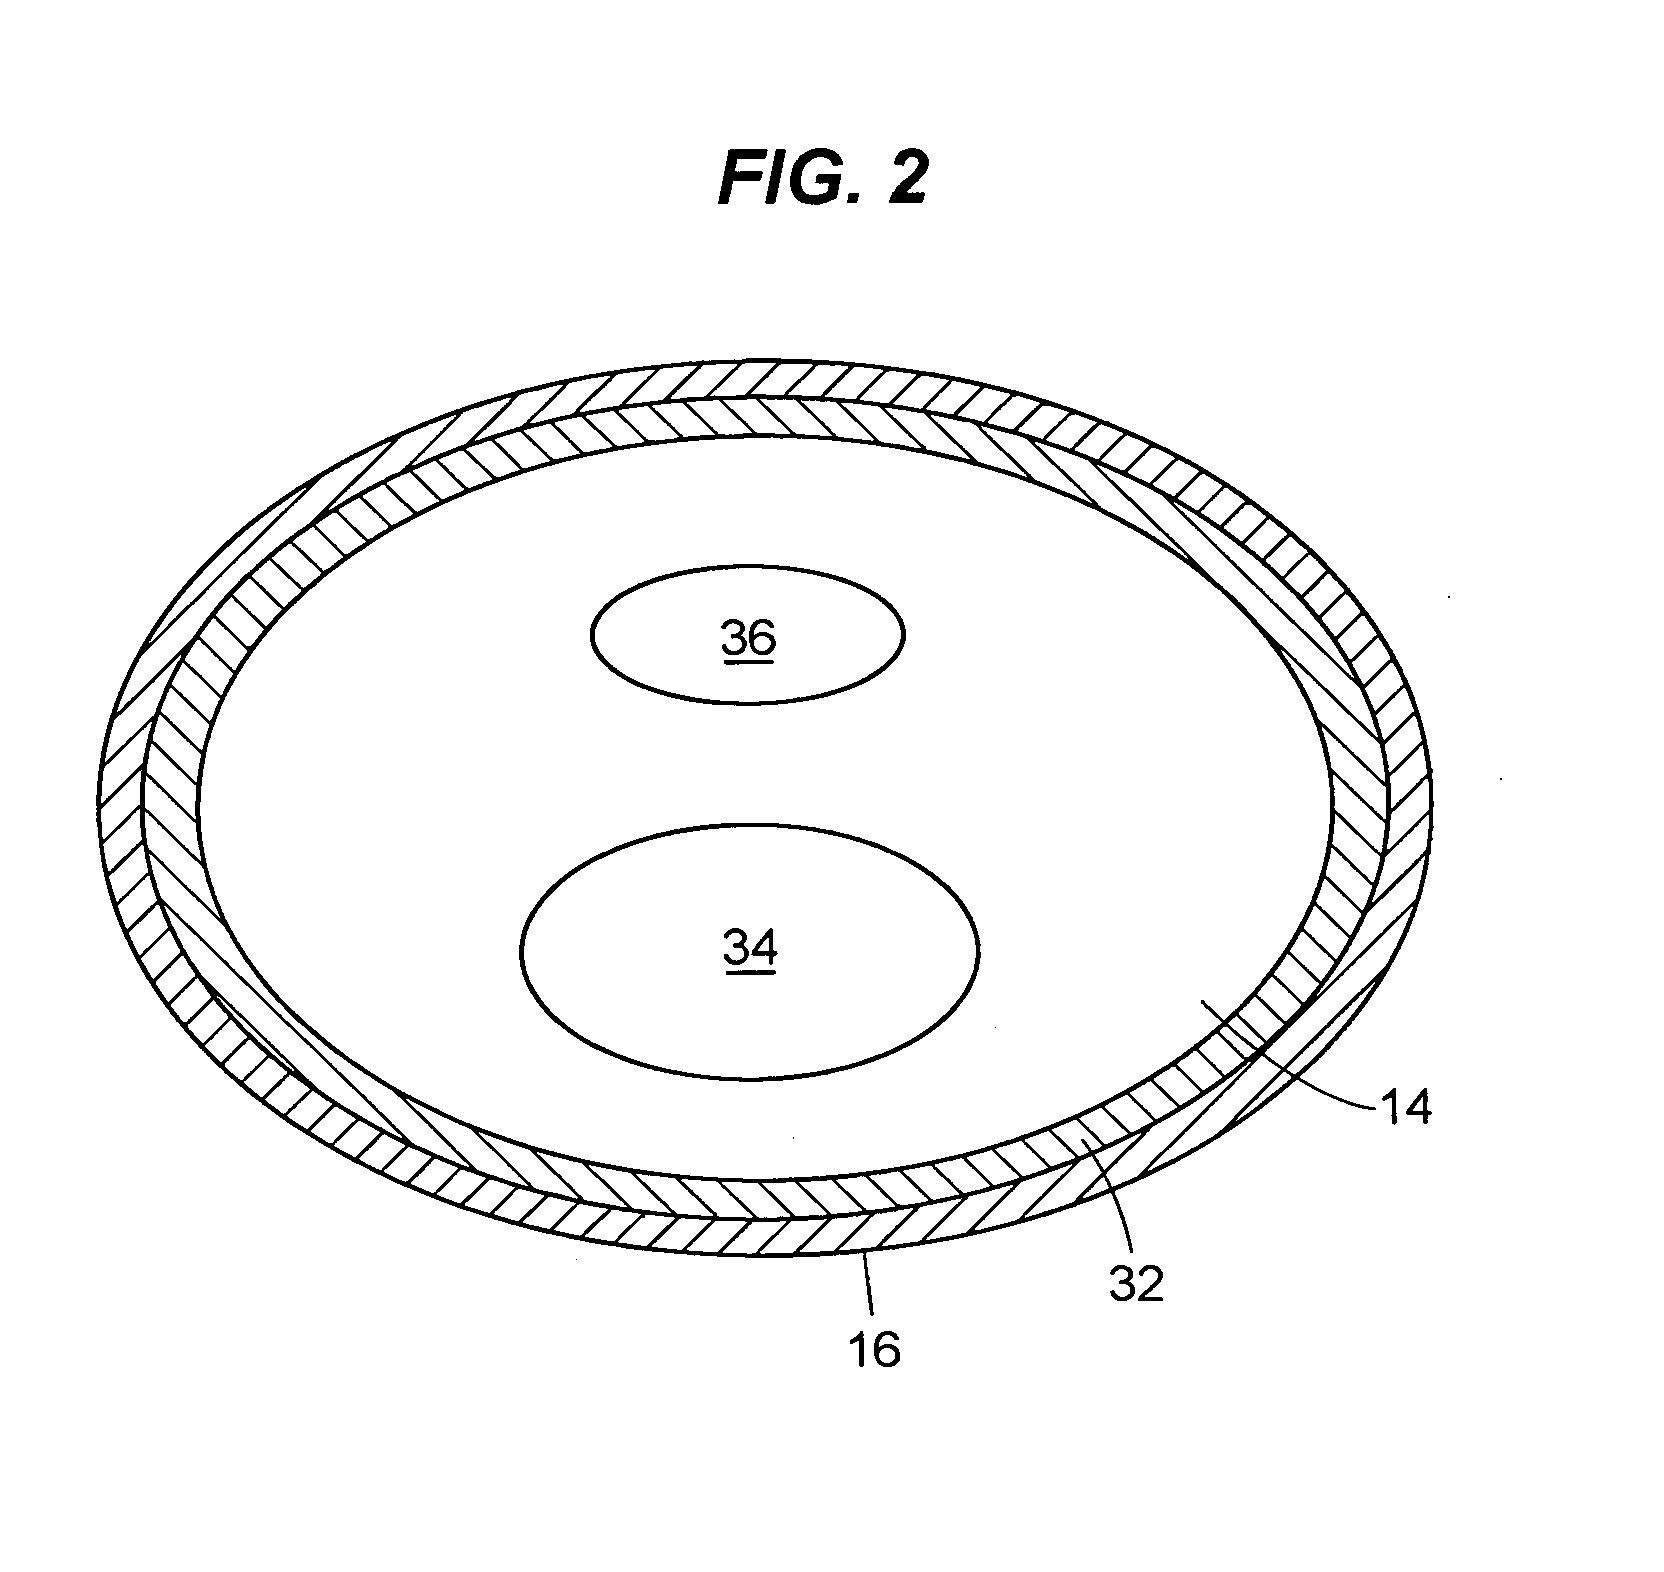 Non-invasive tracking device and method